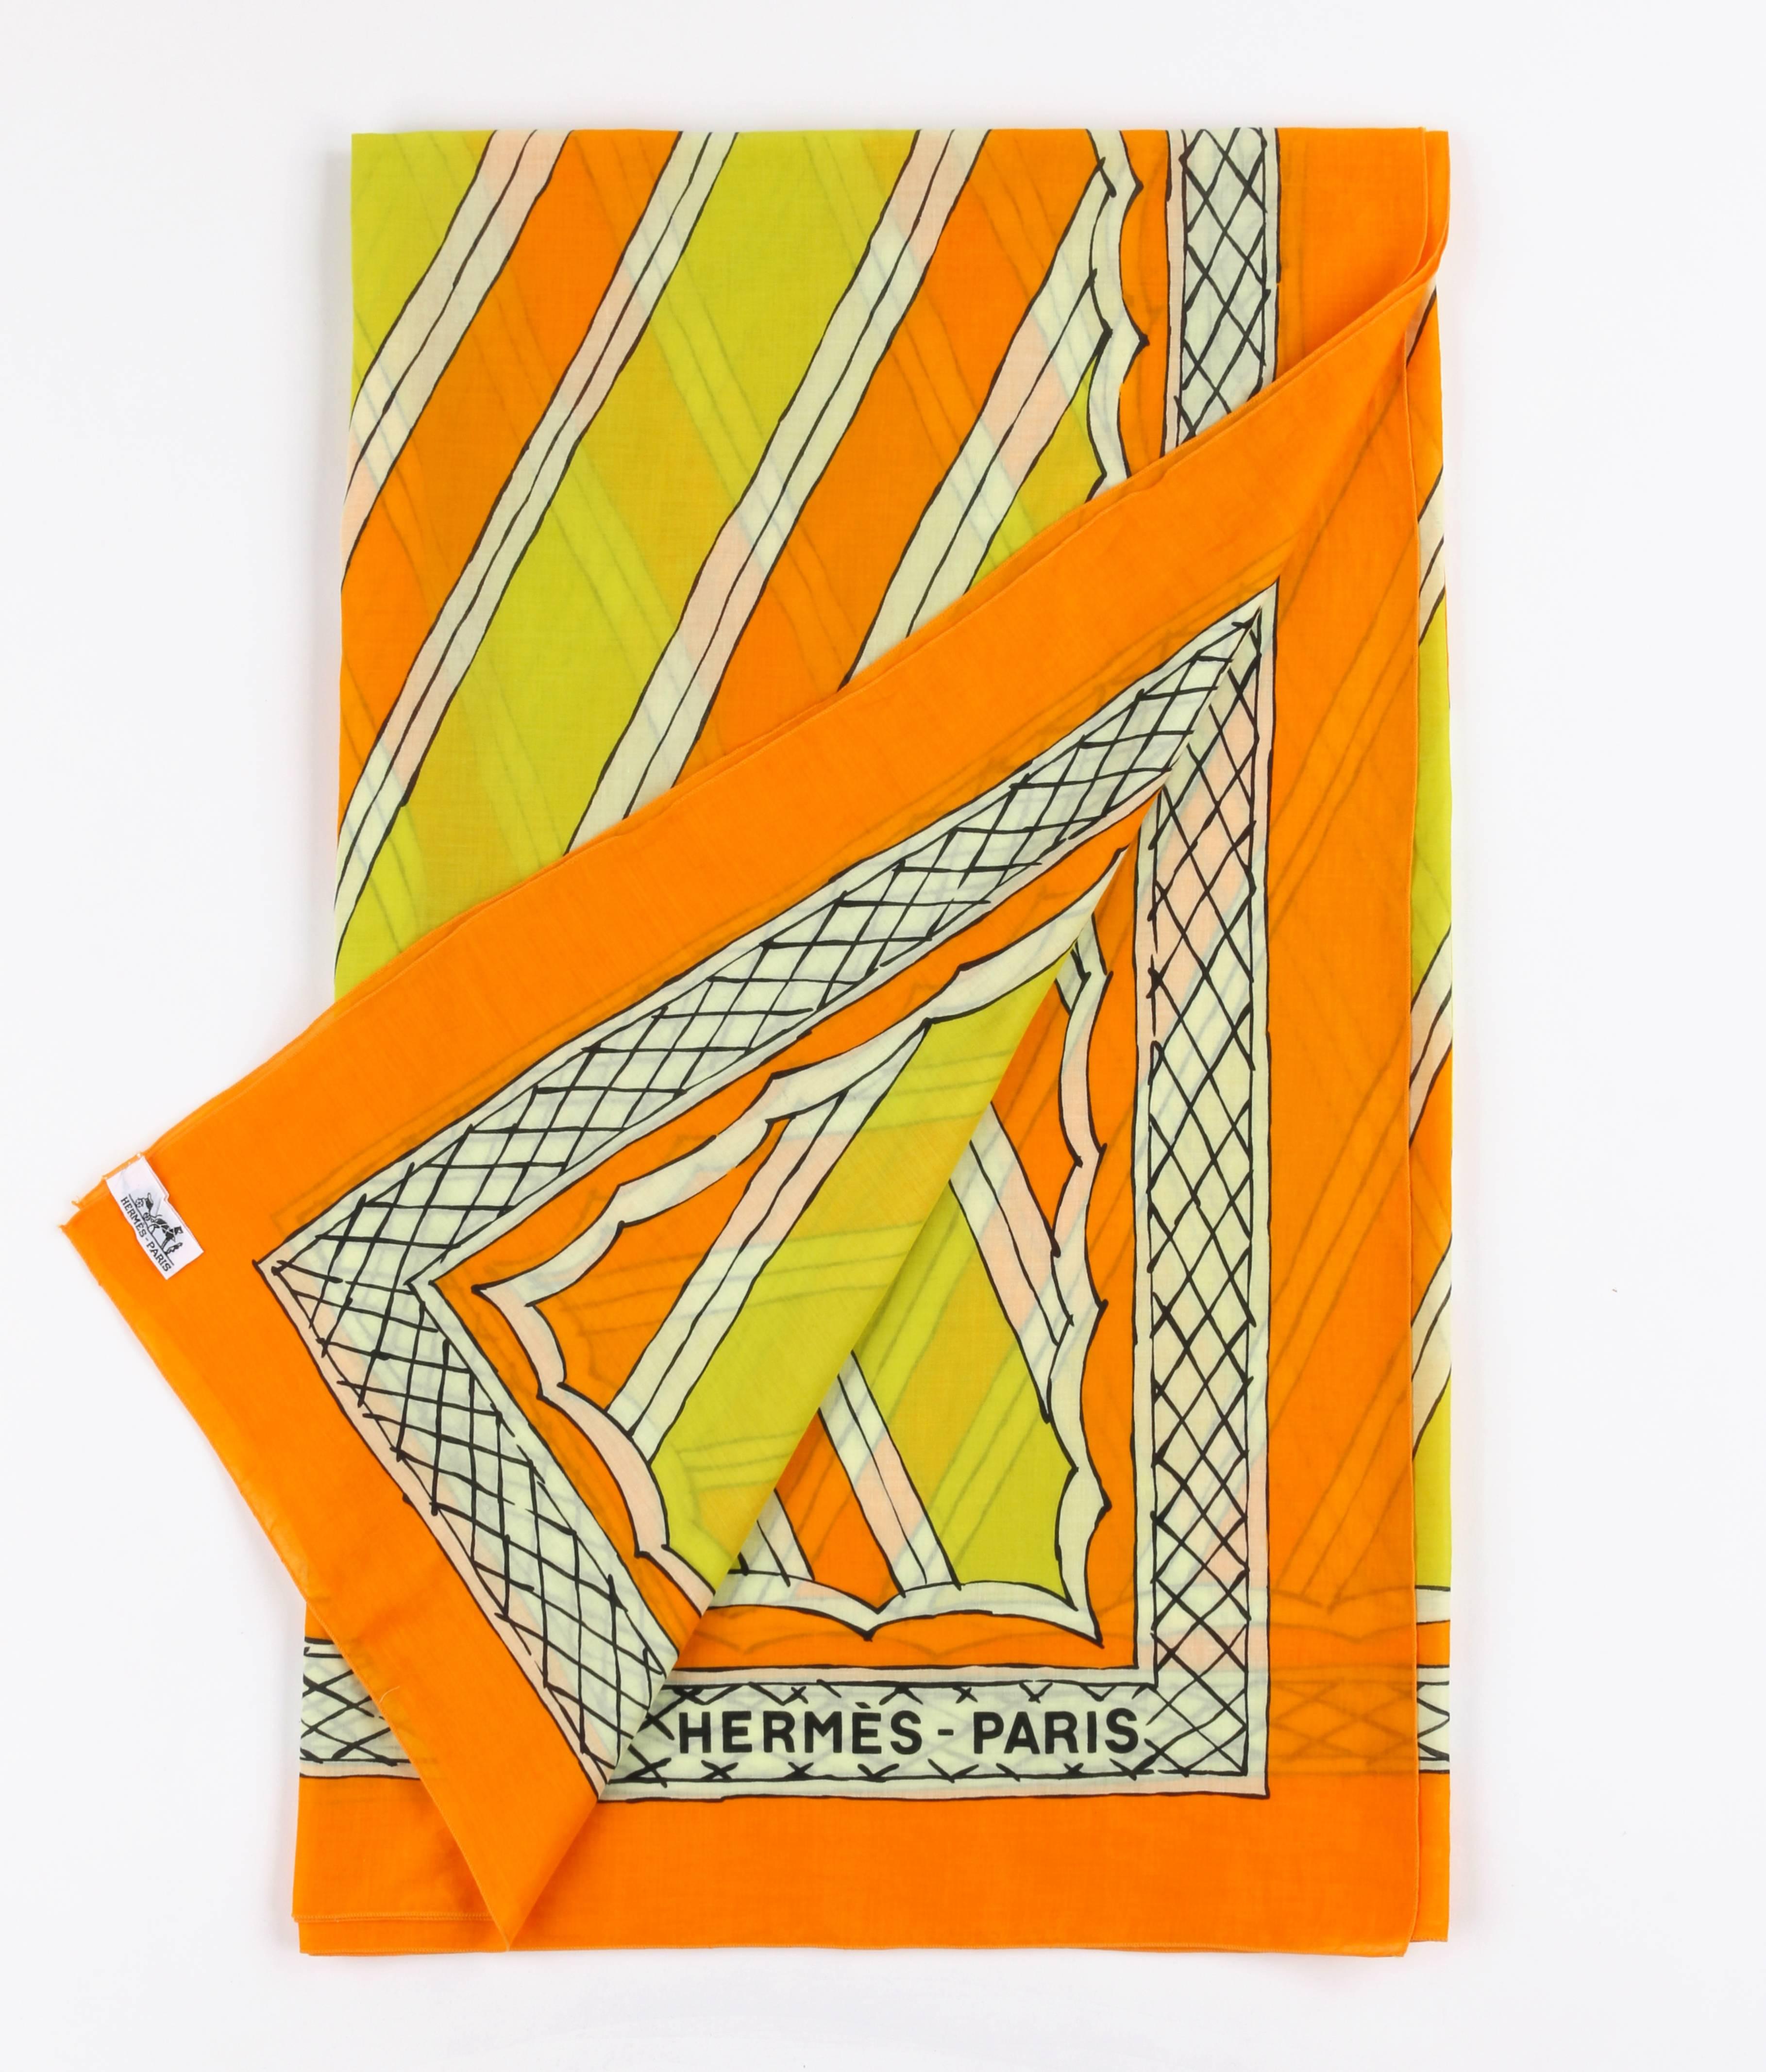 Tan France Auction Pick

Hermes large orange and yellow cotton multi-use scarf. Orange, yellow, and winter white diagonal striped painterly design at center with scalloped edge. Winter white and back crosshatched boarder print. Orange background.